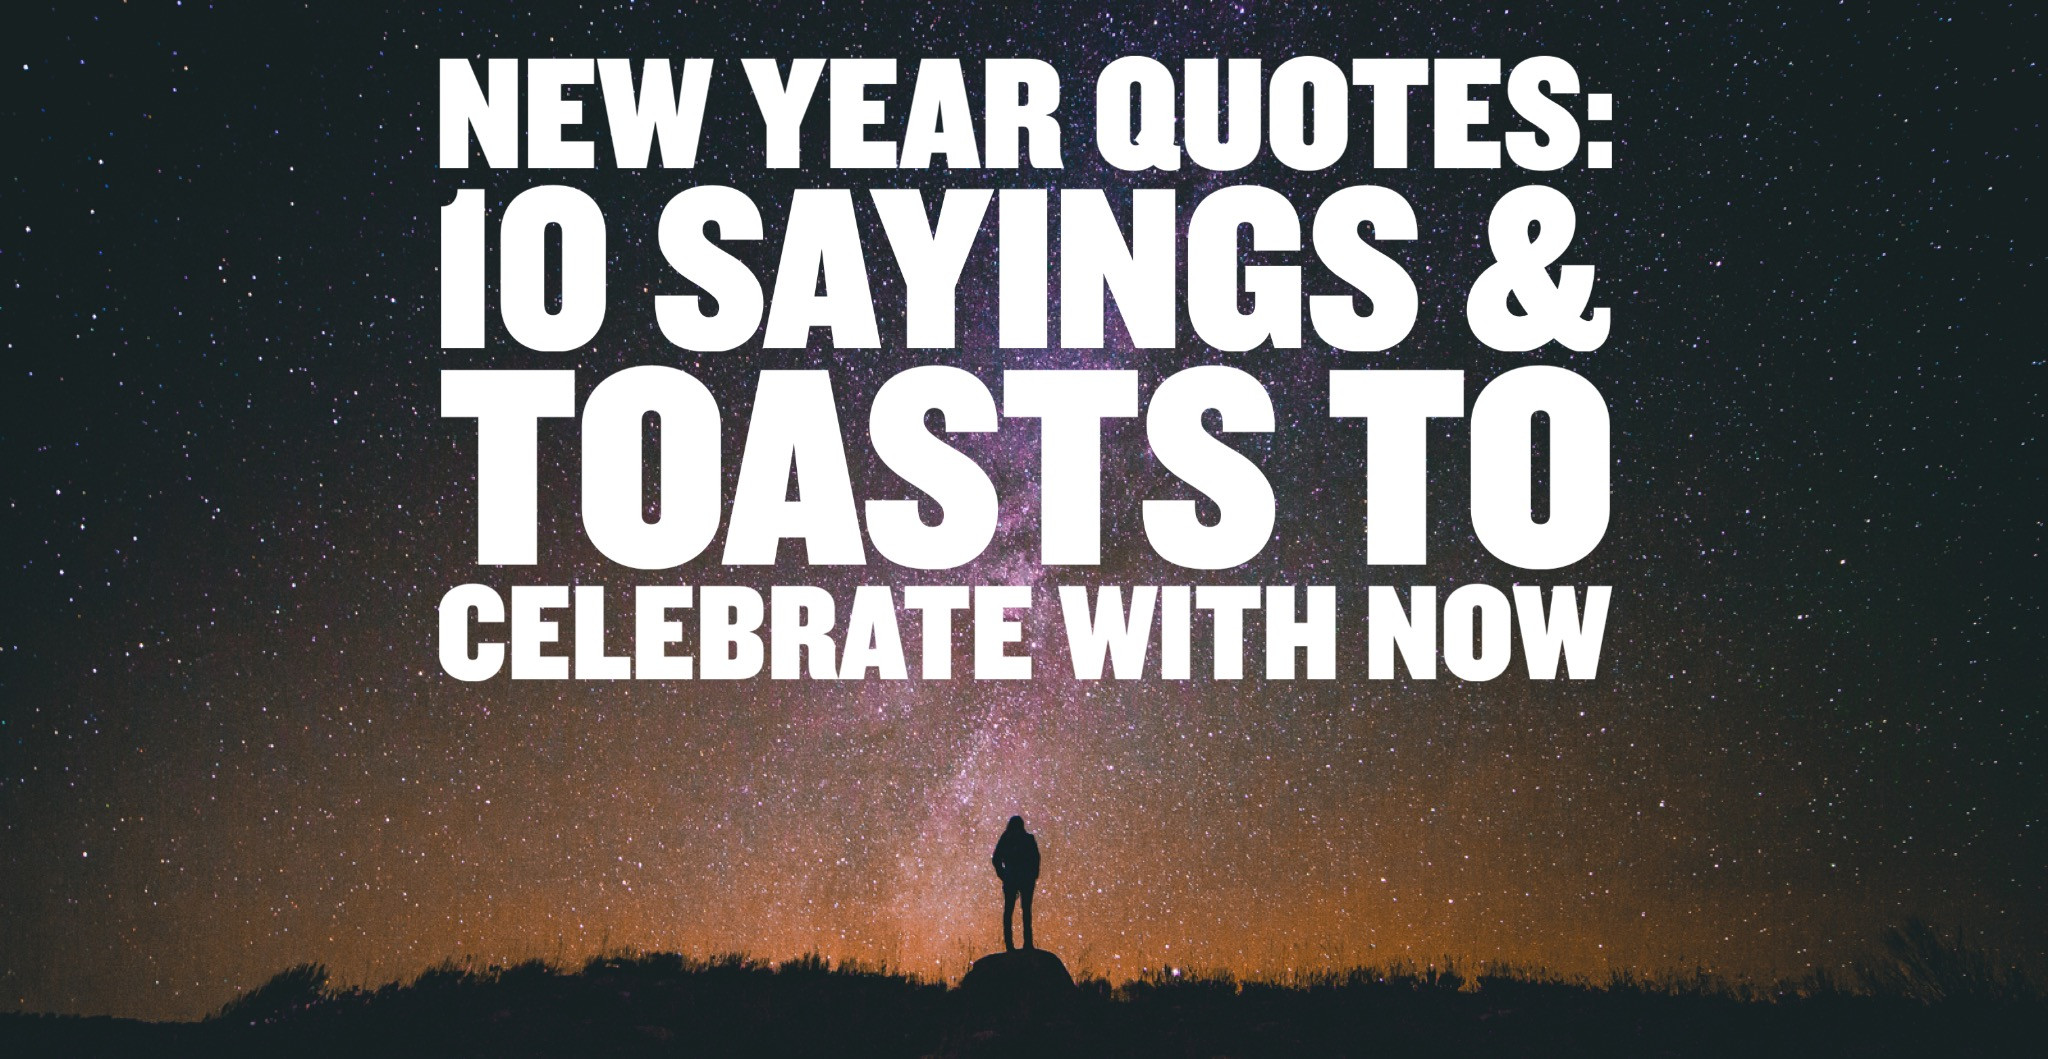 Quote New Year
 New Year Quotes 10 Sayings & Toasts To Celebrate With